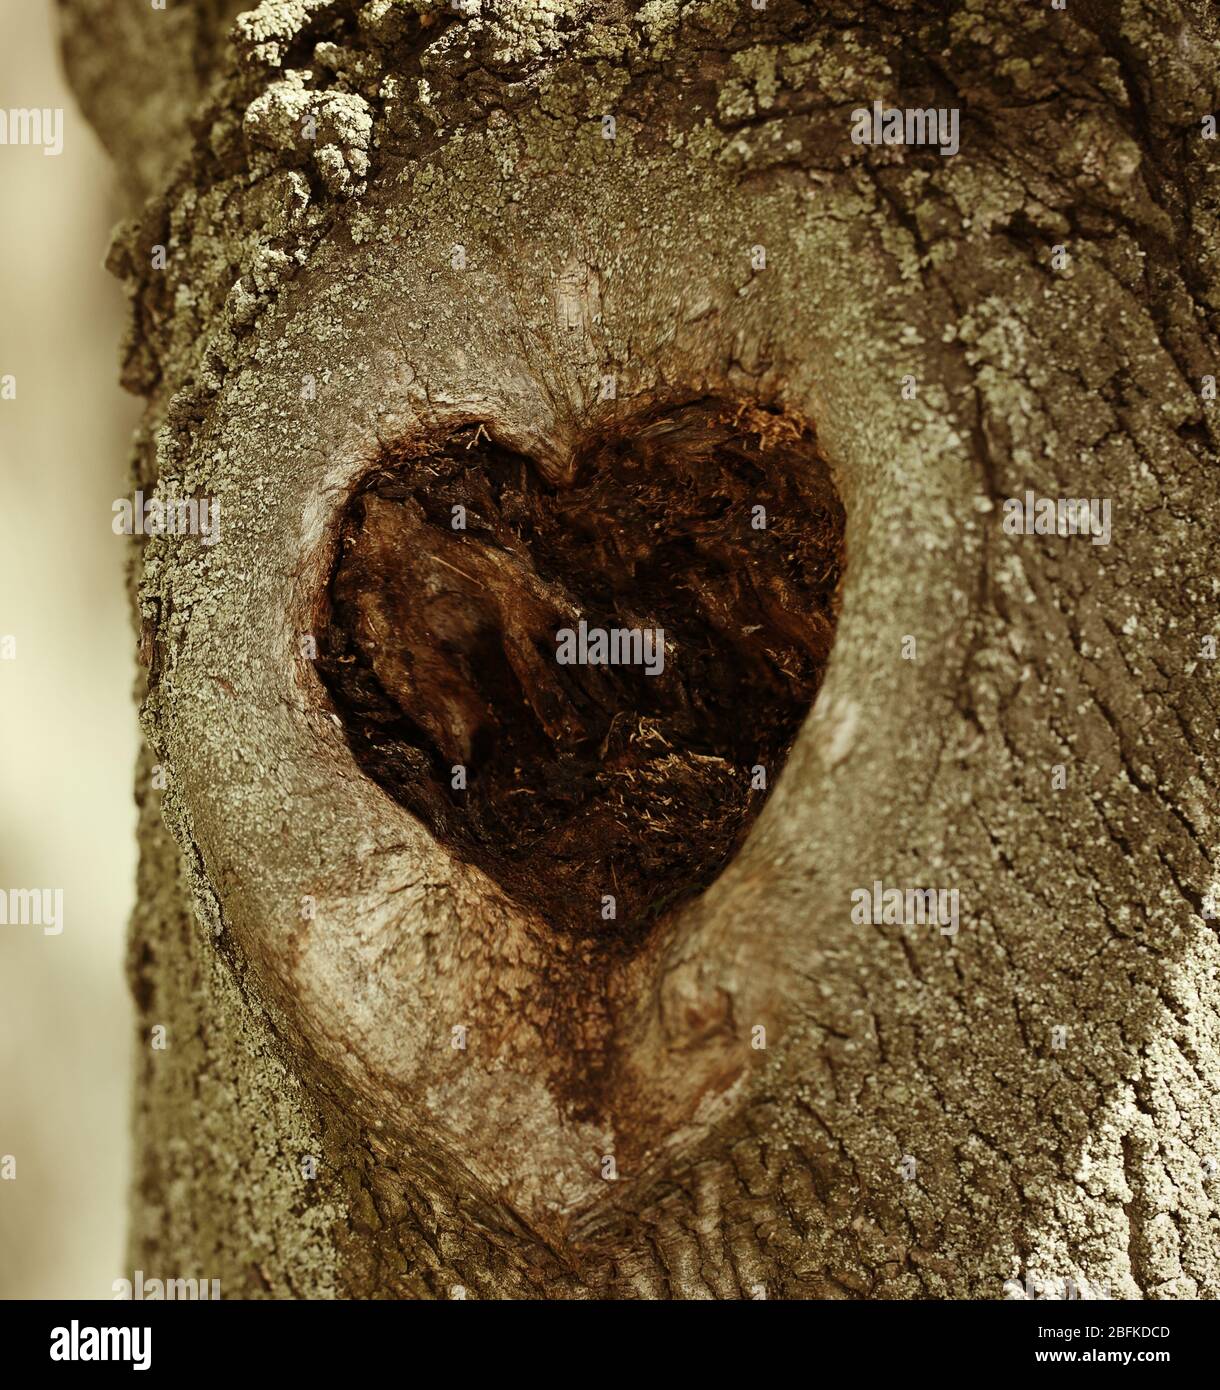 Tree hollow in heart shape close-up Stock Photo